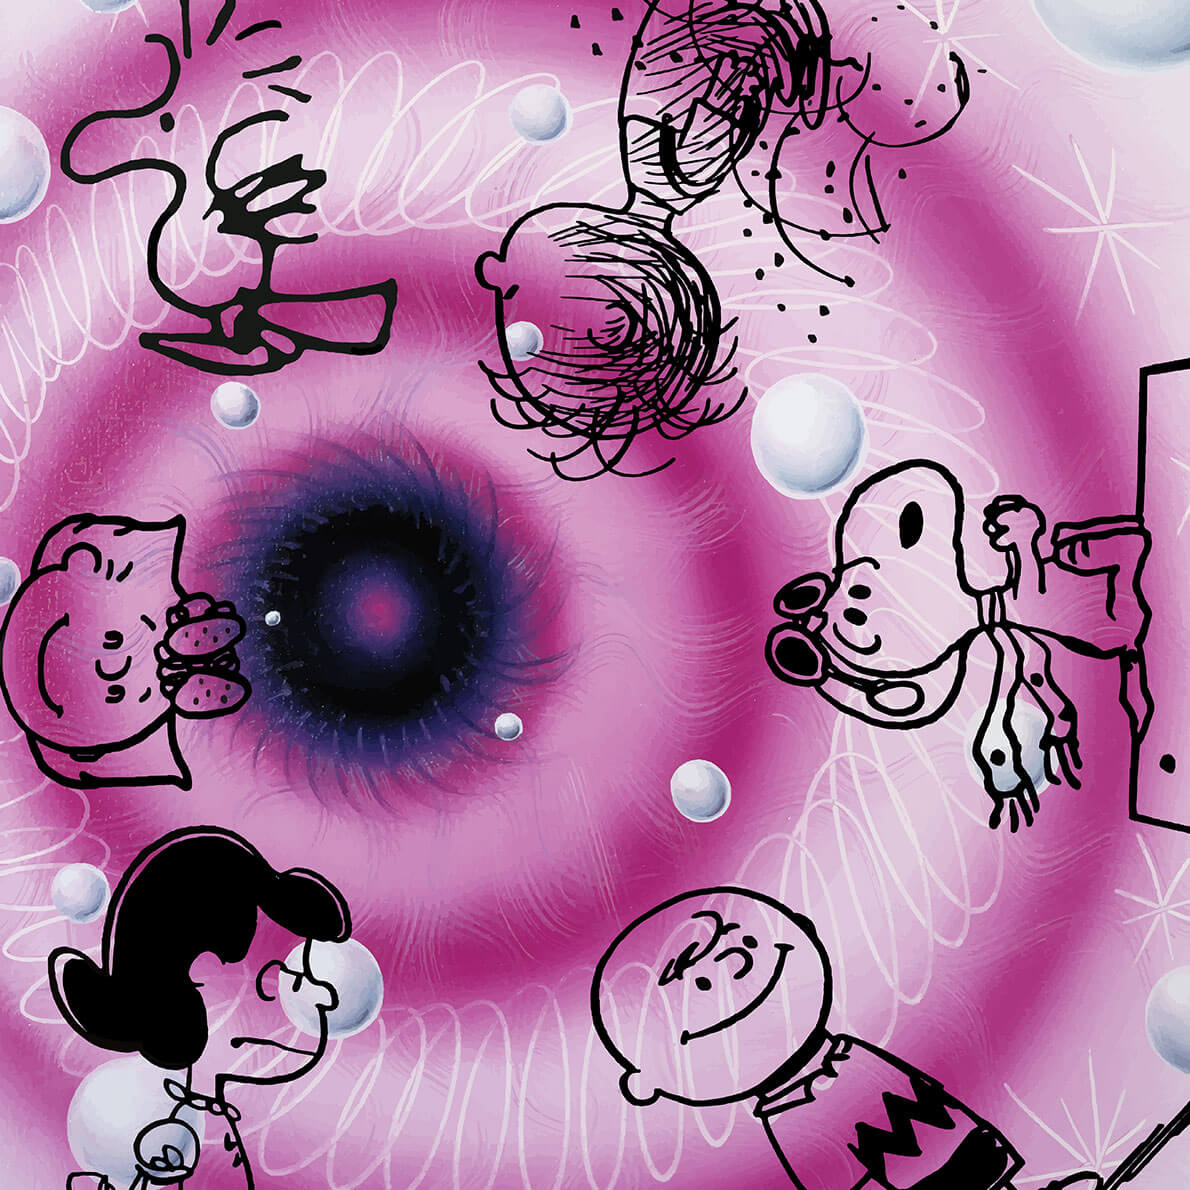 A spray painted, purple eye with show characters around it.